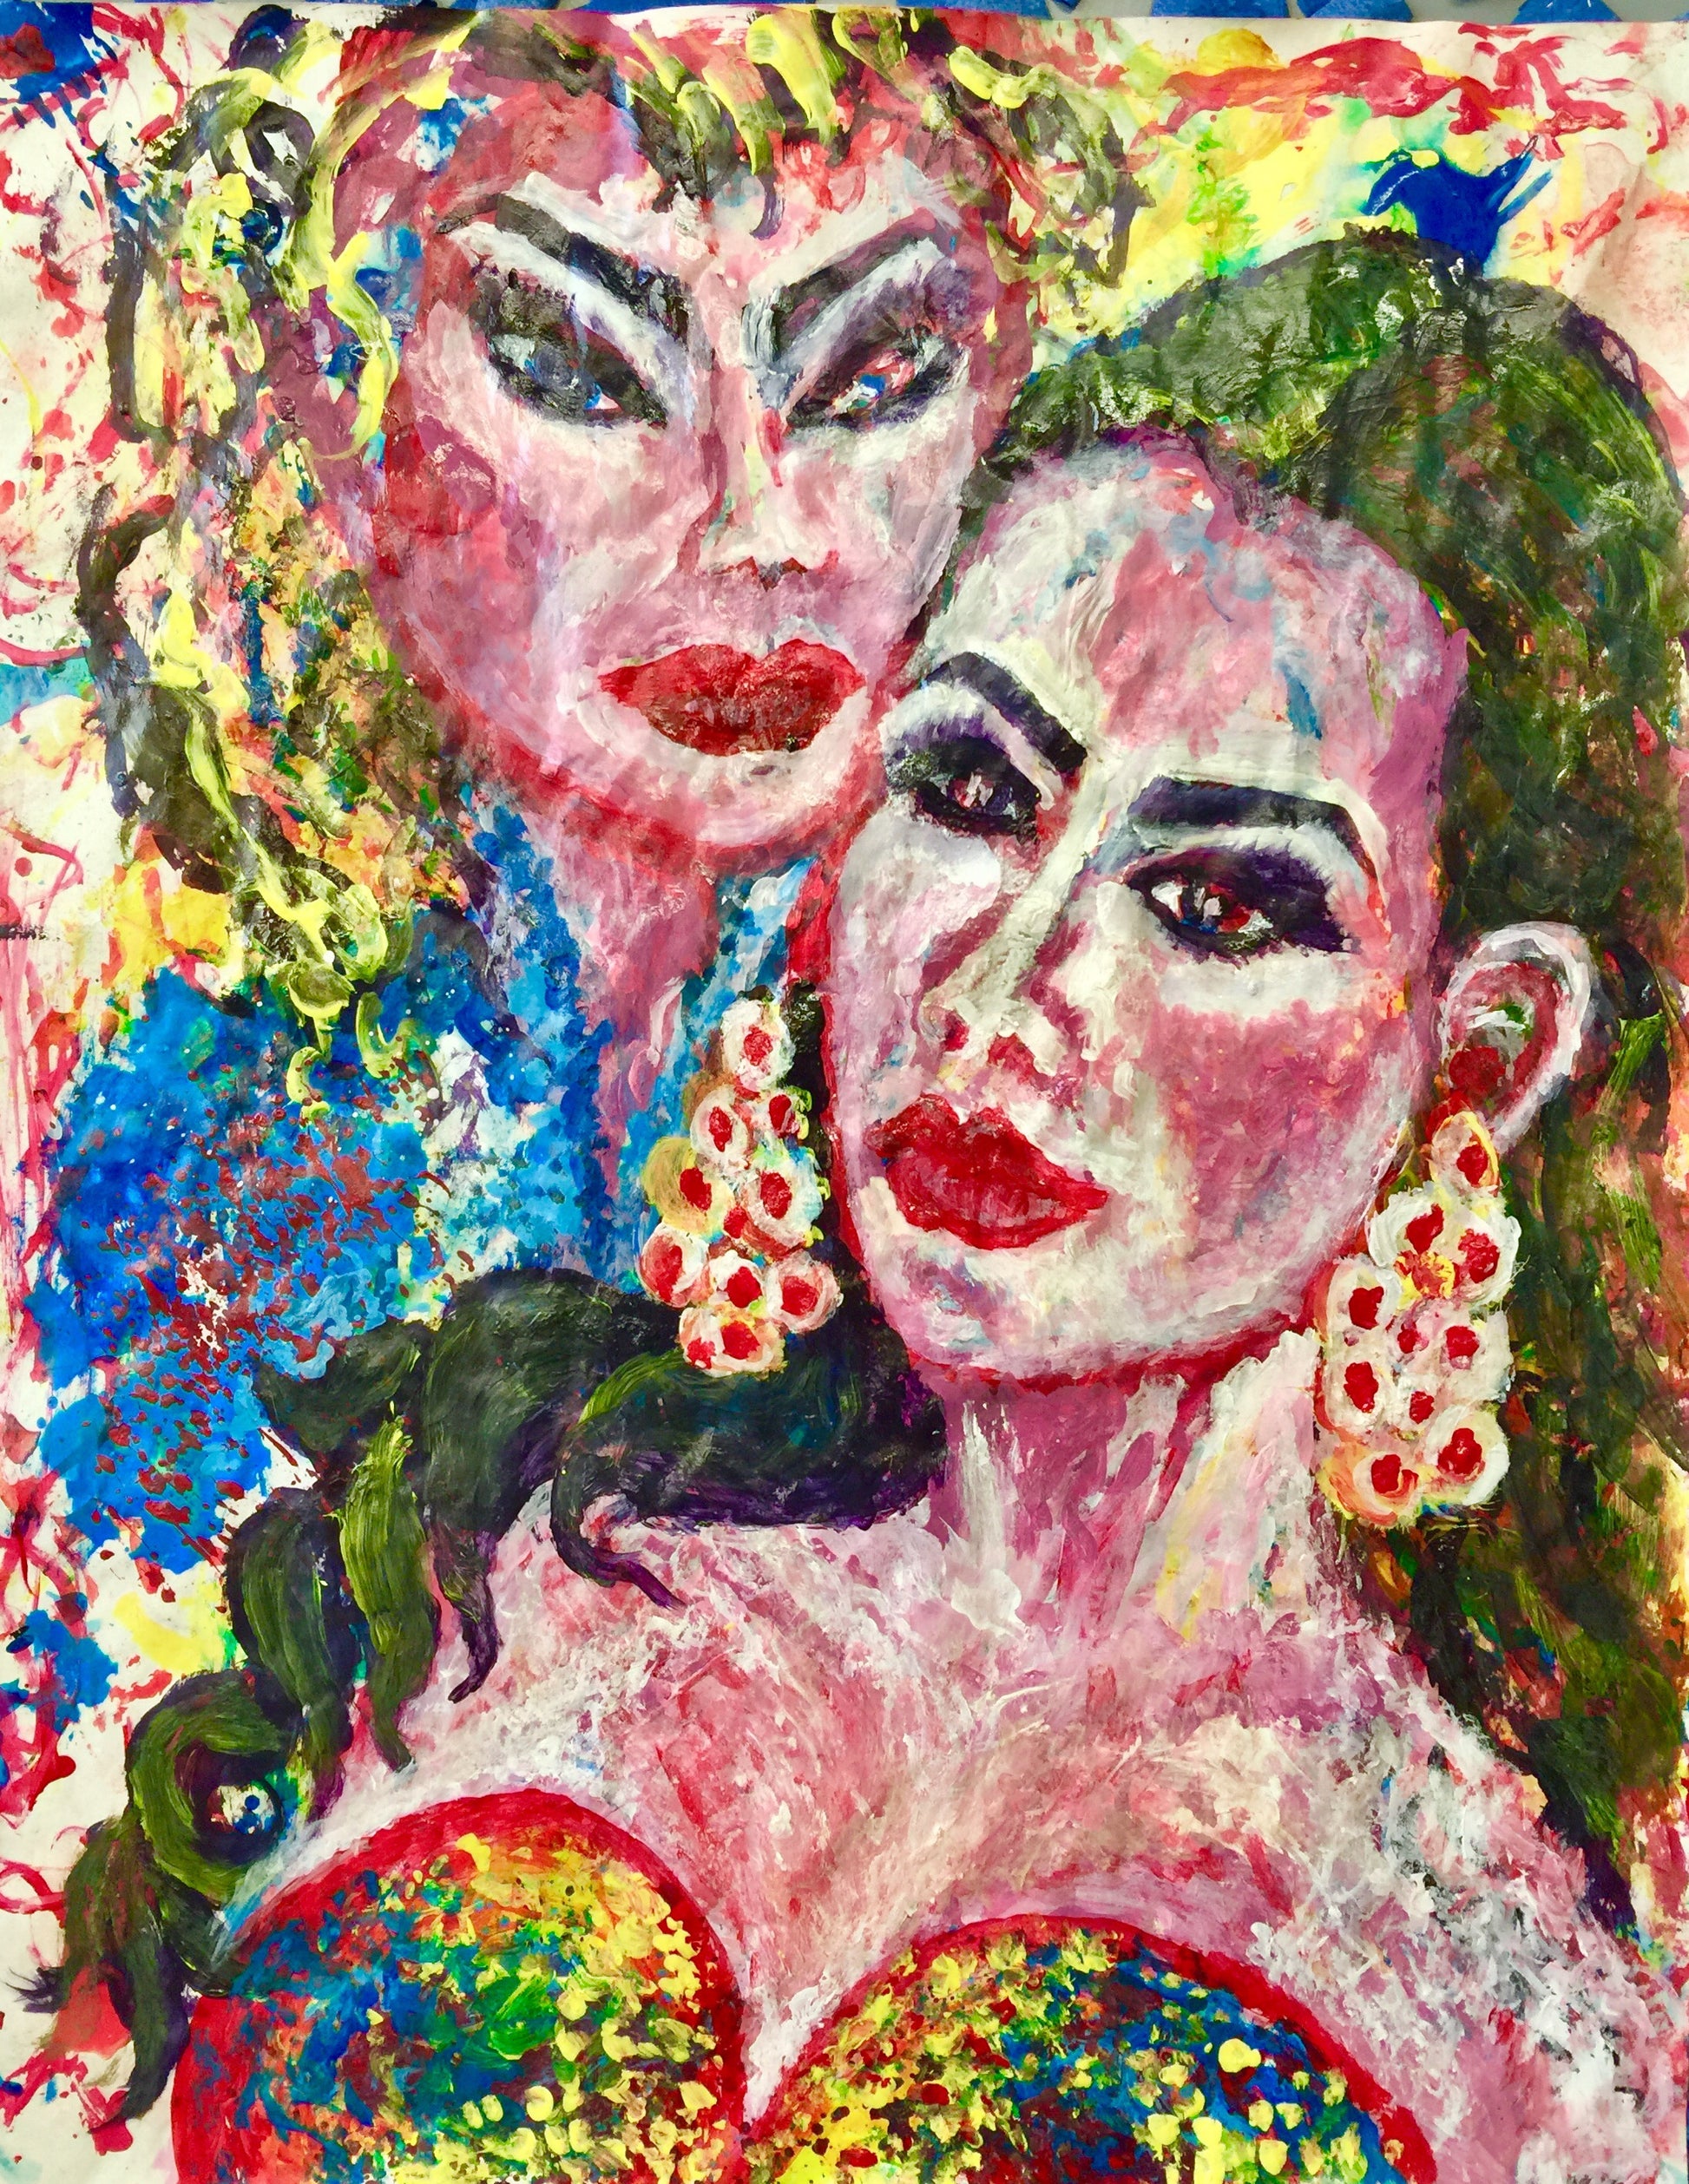 blaze_of_glory] - Sonarta.com,Commissioned by Sanaz Kiani to be placed at her salon.  This Acrylic on Paper painting is created by artist, Shahla Rahimi Reynolds.  The Divas II is 24” H X 36” W.  The Canvas Painting is ready to be hung.